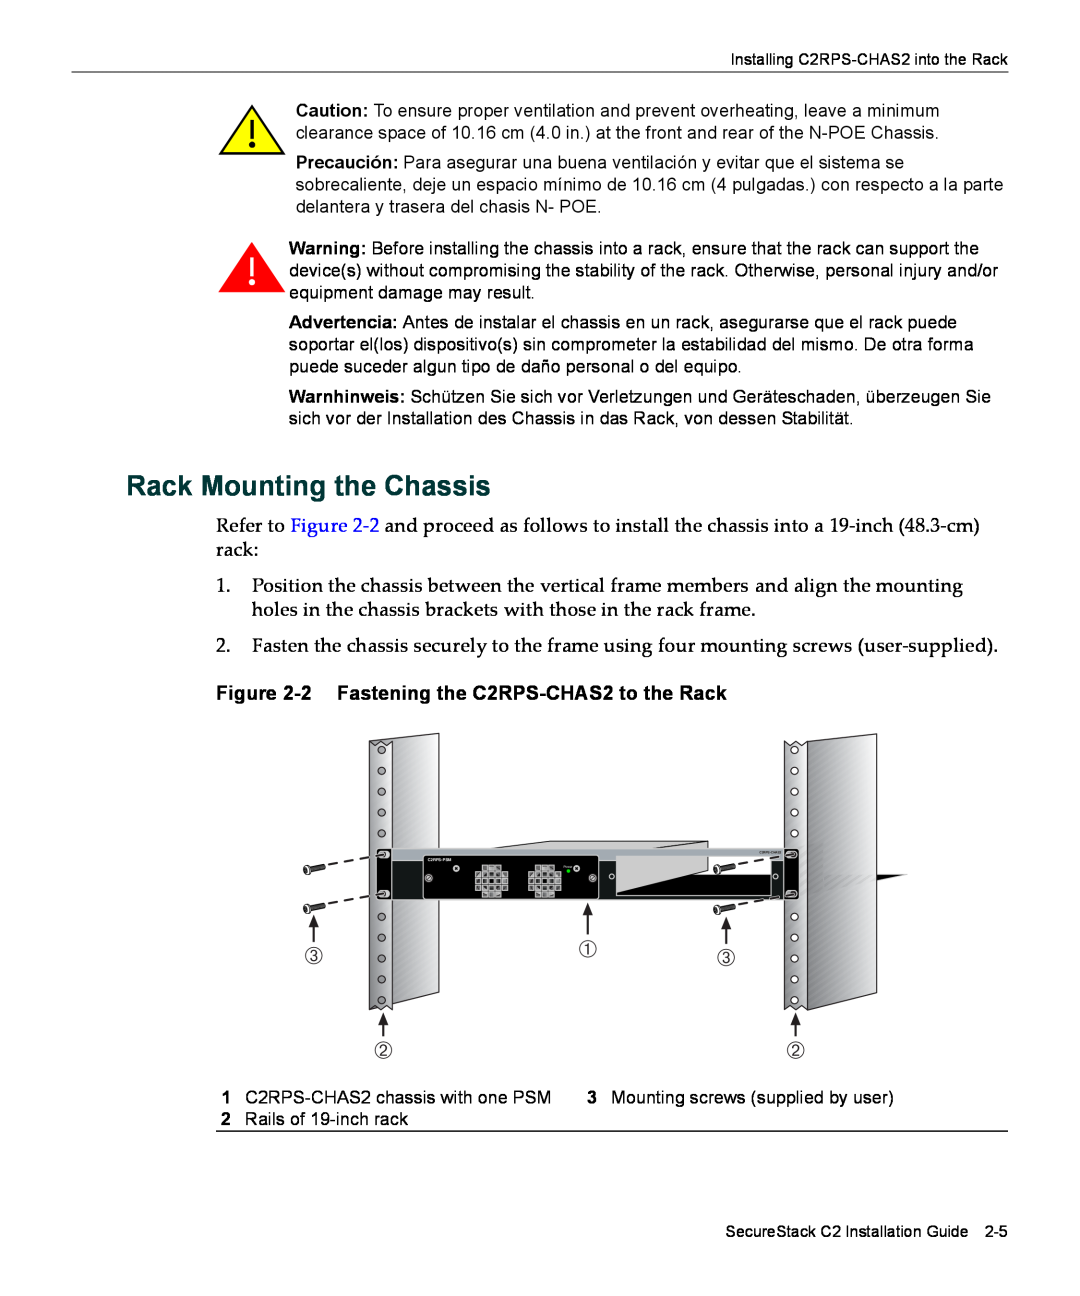 Enterasys Networks manual Rack Mounting the Chassis, 2 Fastening the C2RPS-CHAS2 to the Rack 